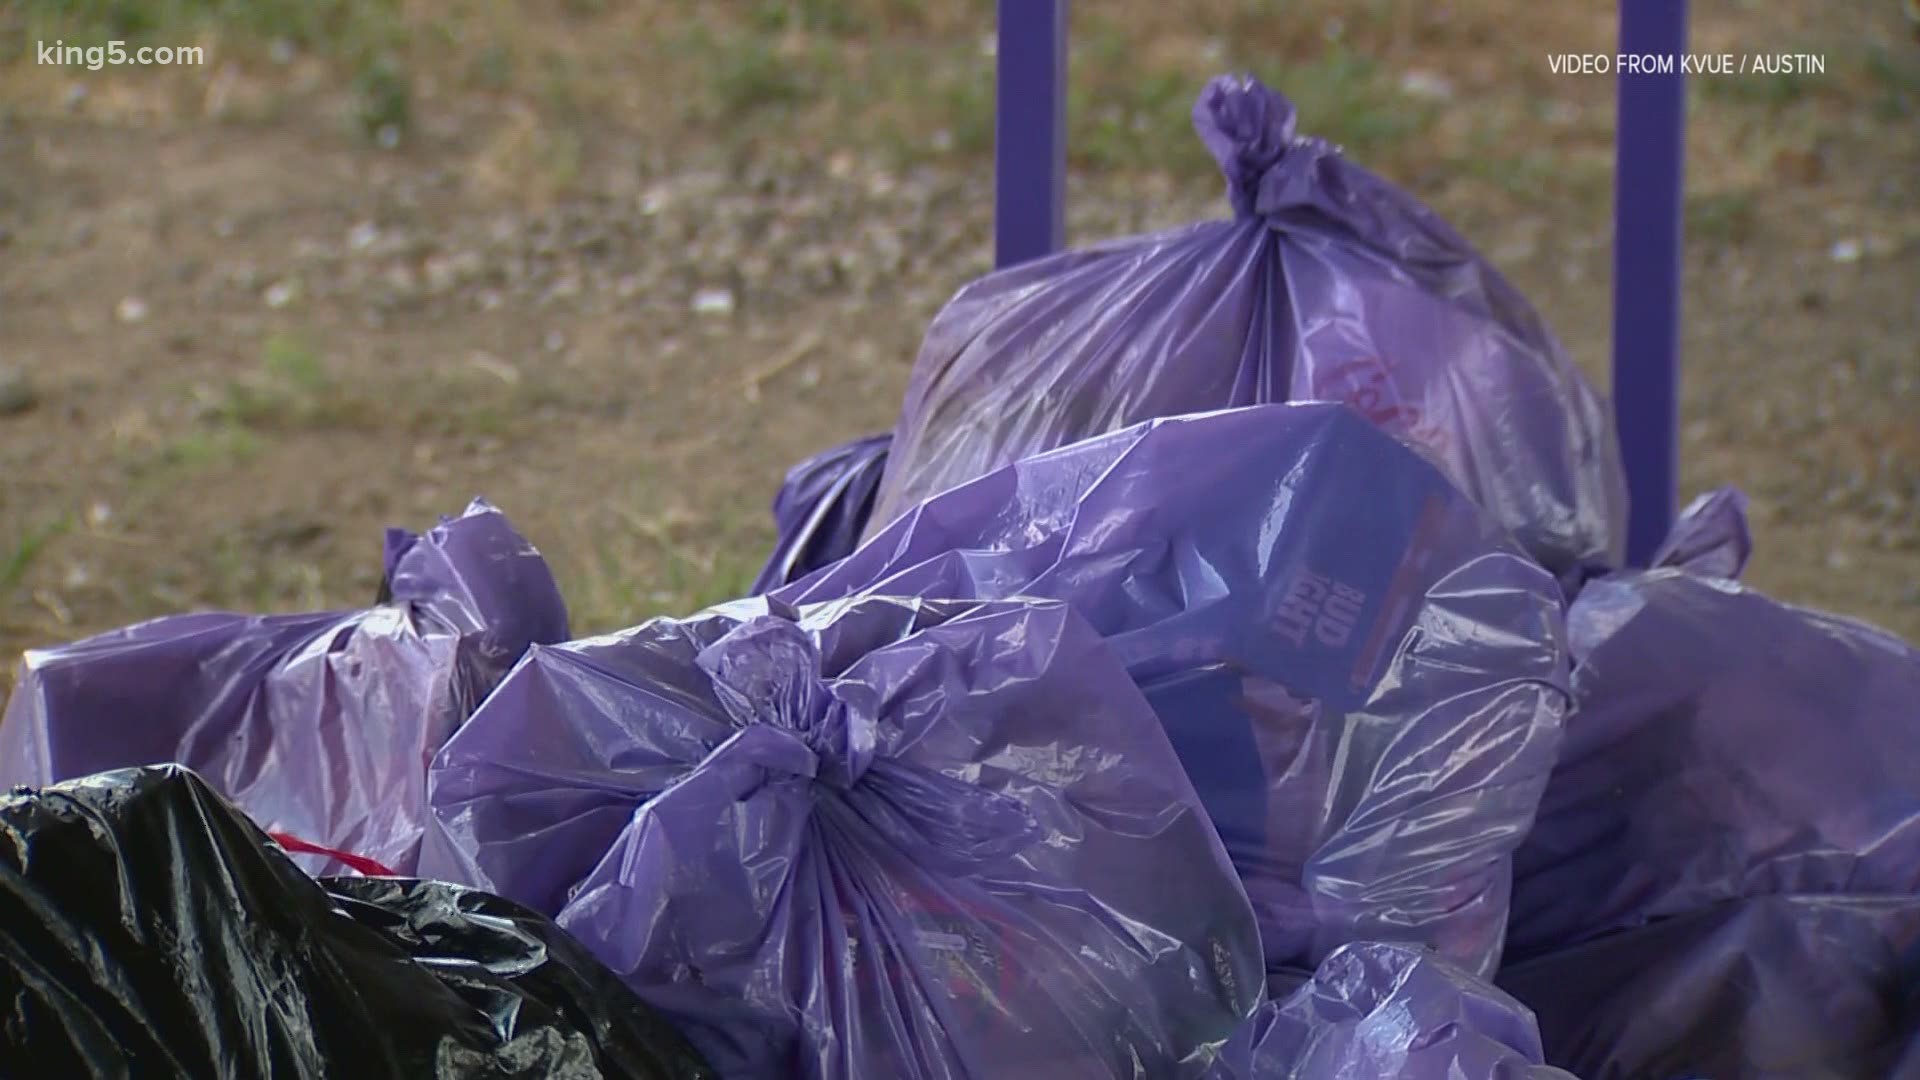 What are those violet trash bags about? How Austin hopes to encourage  homeless population to clean up their areas